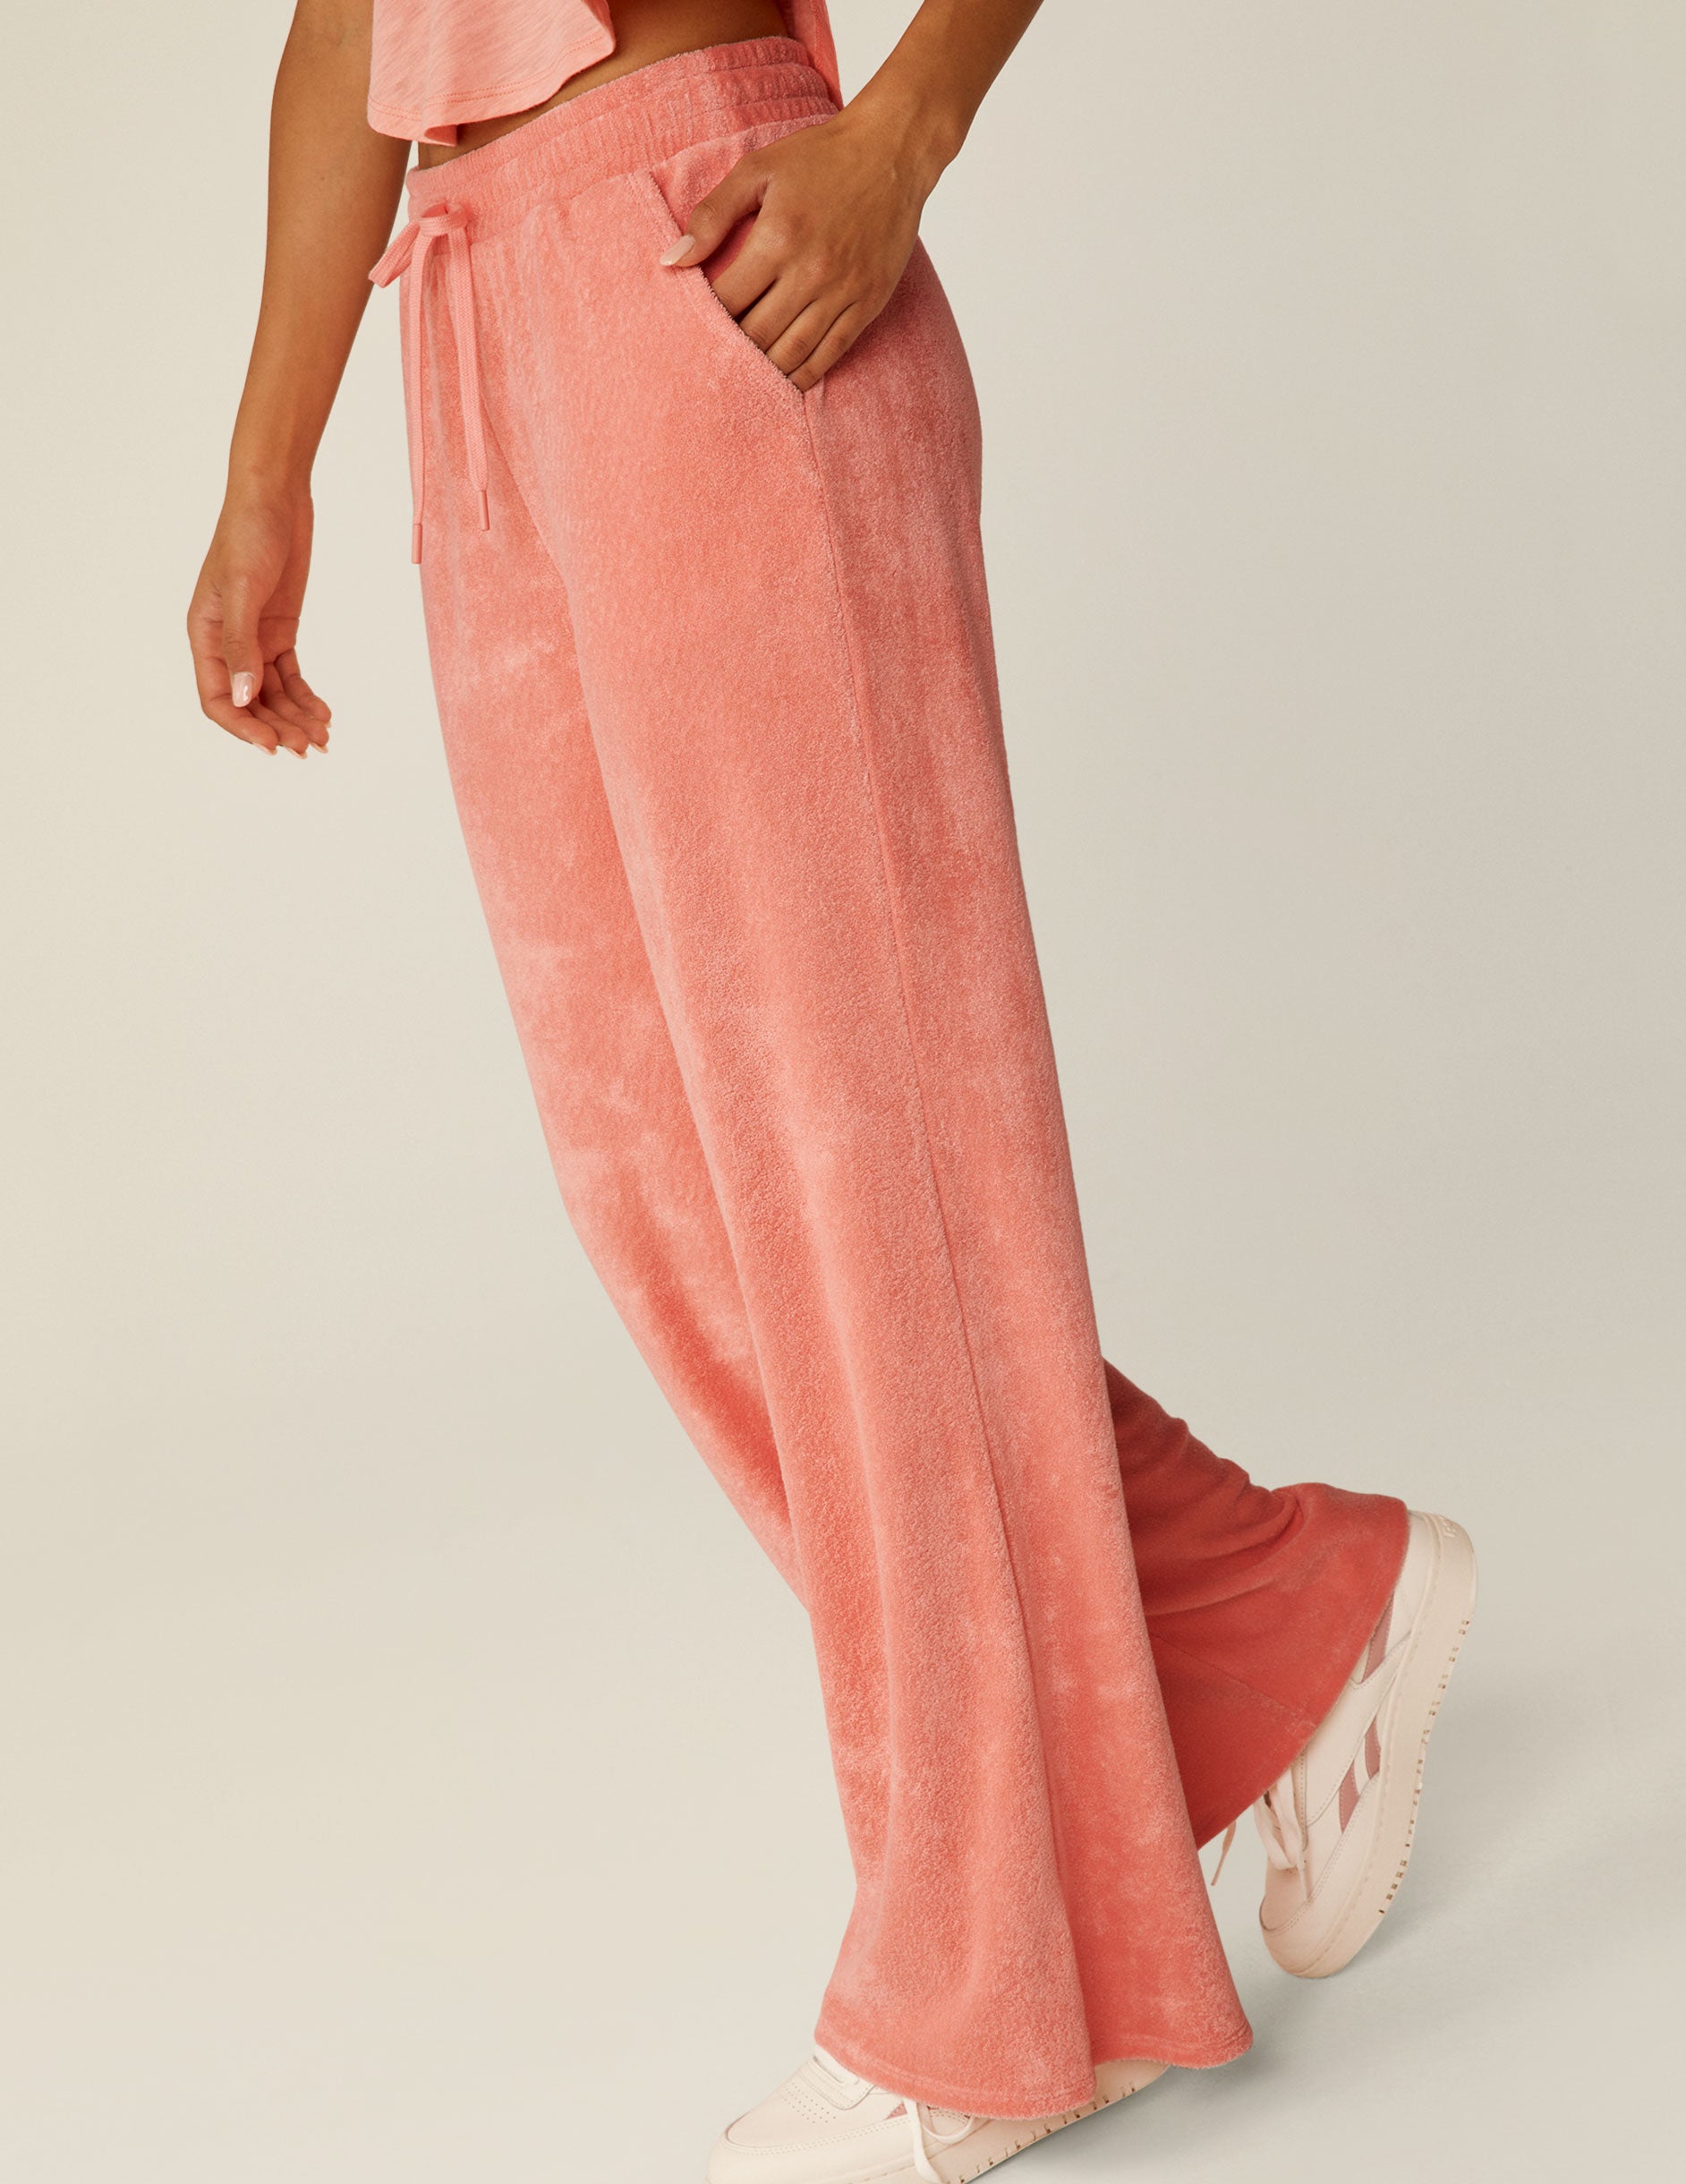 pink terry fabric pants with a drawstring at waistband.